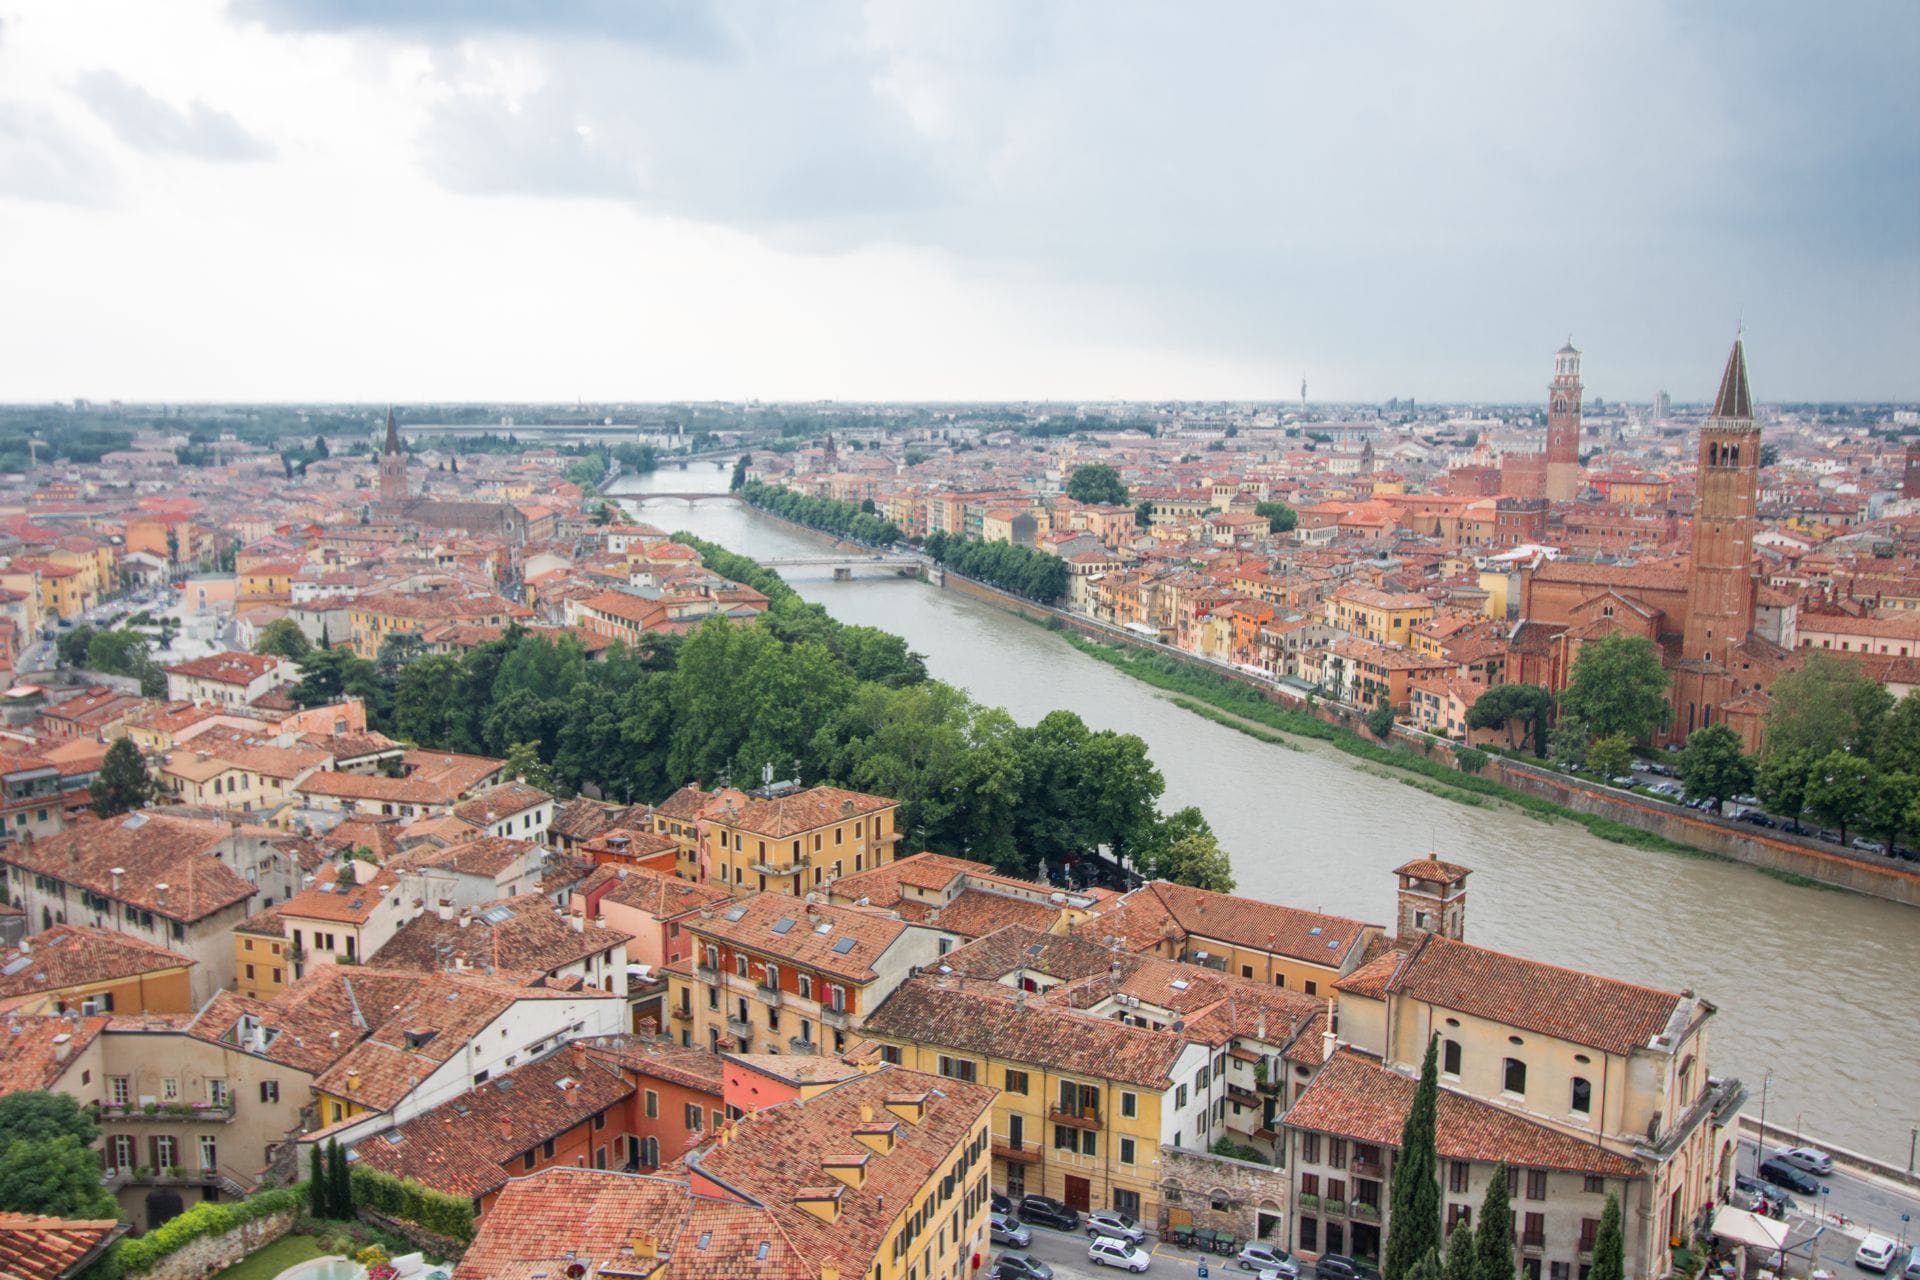 italian-city-views-across-a-river-and-orange-rooftops-viewpoint-from-castel-san-pietro